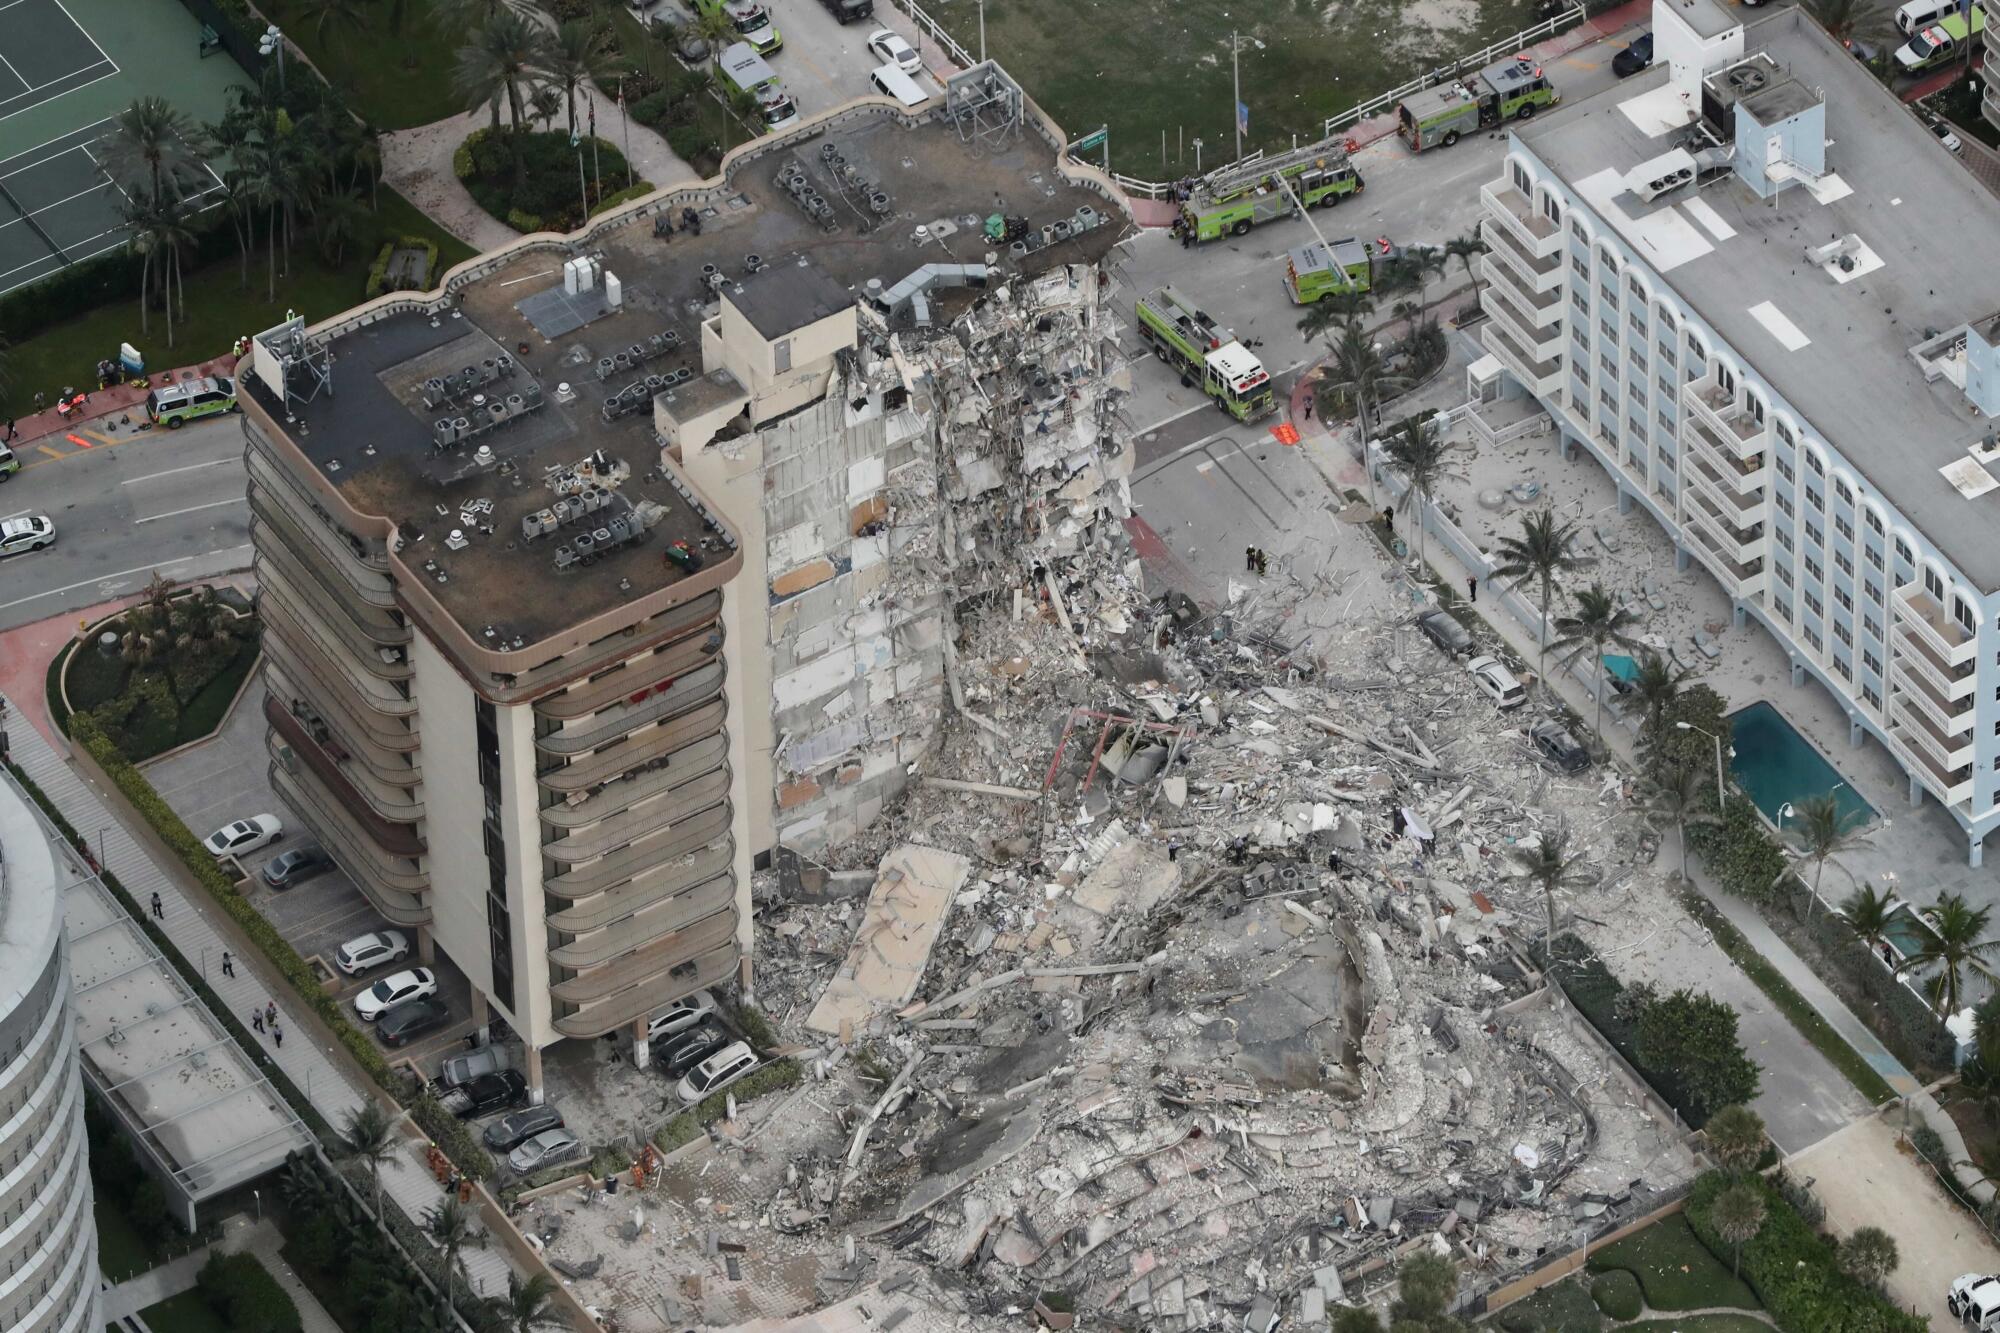 An aerial photo shows part of the Champlain Towers South condo collapse